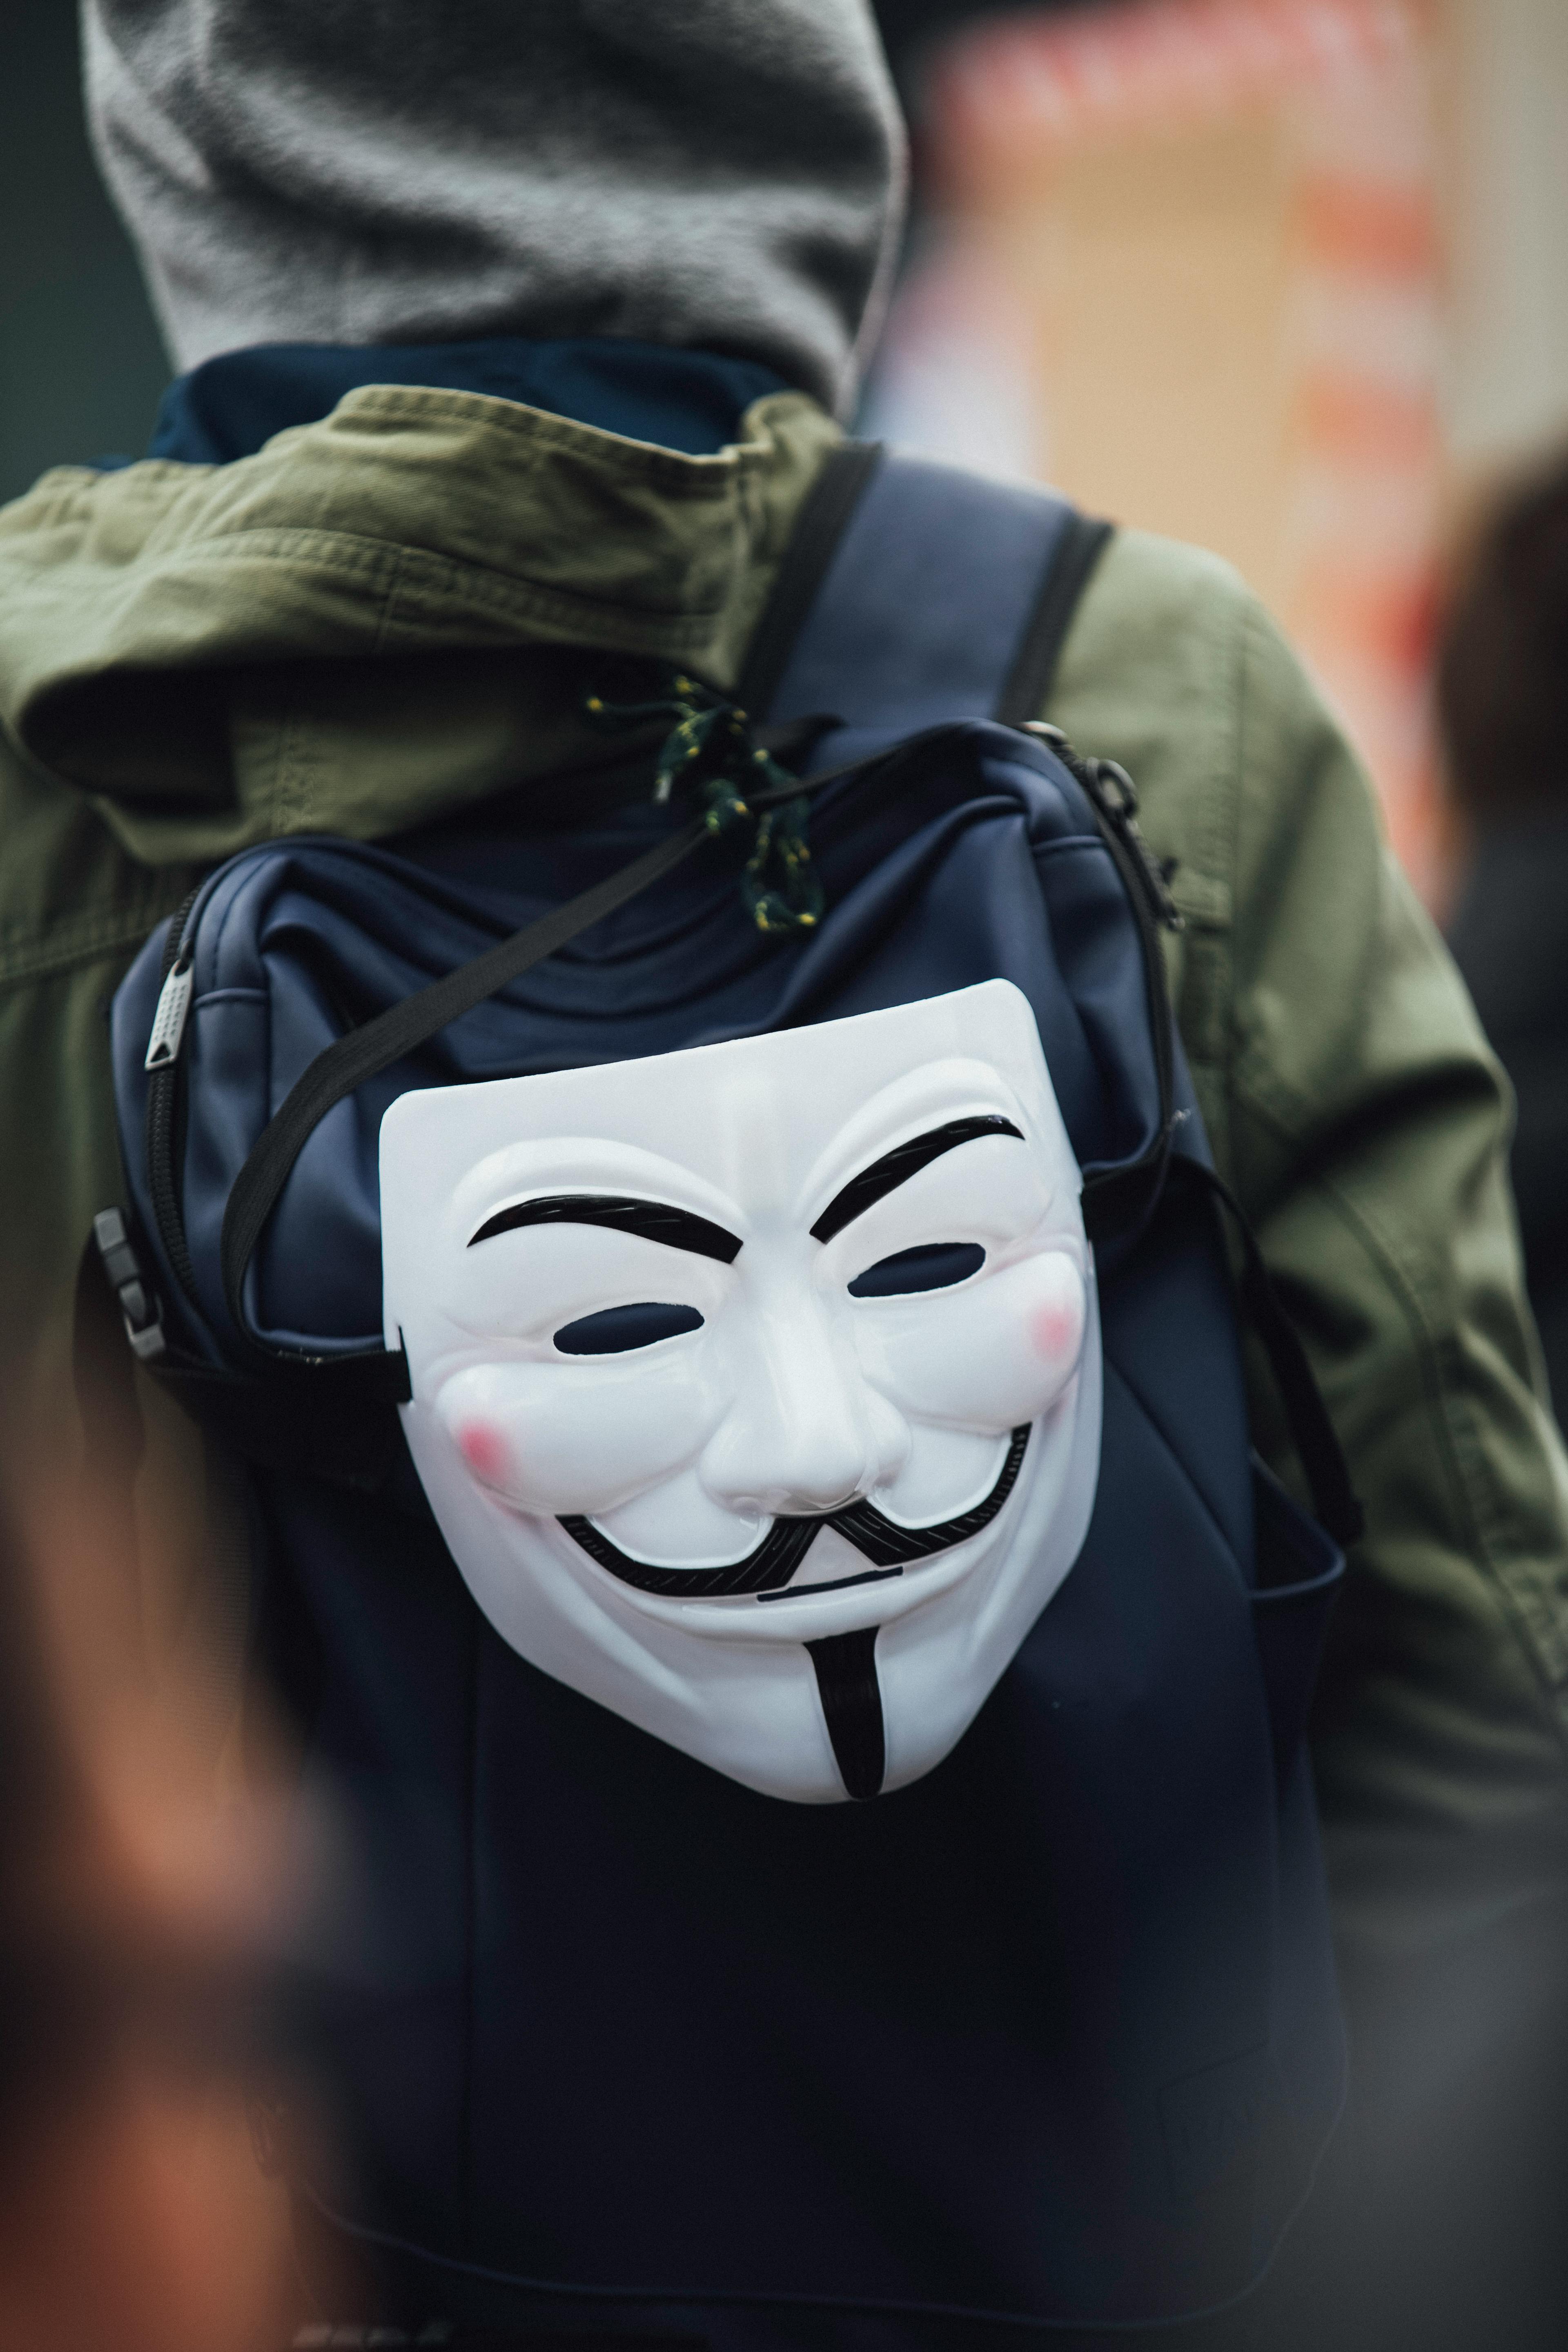 🔥 Hackers Wallpaper Full HD anonymous Free Download